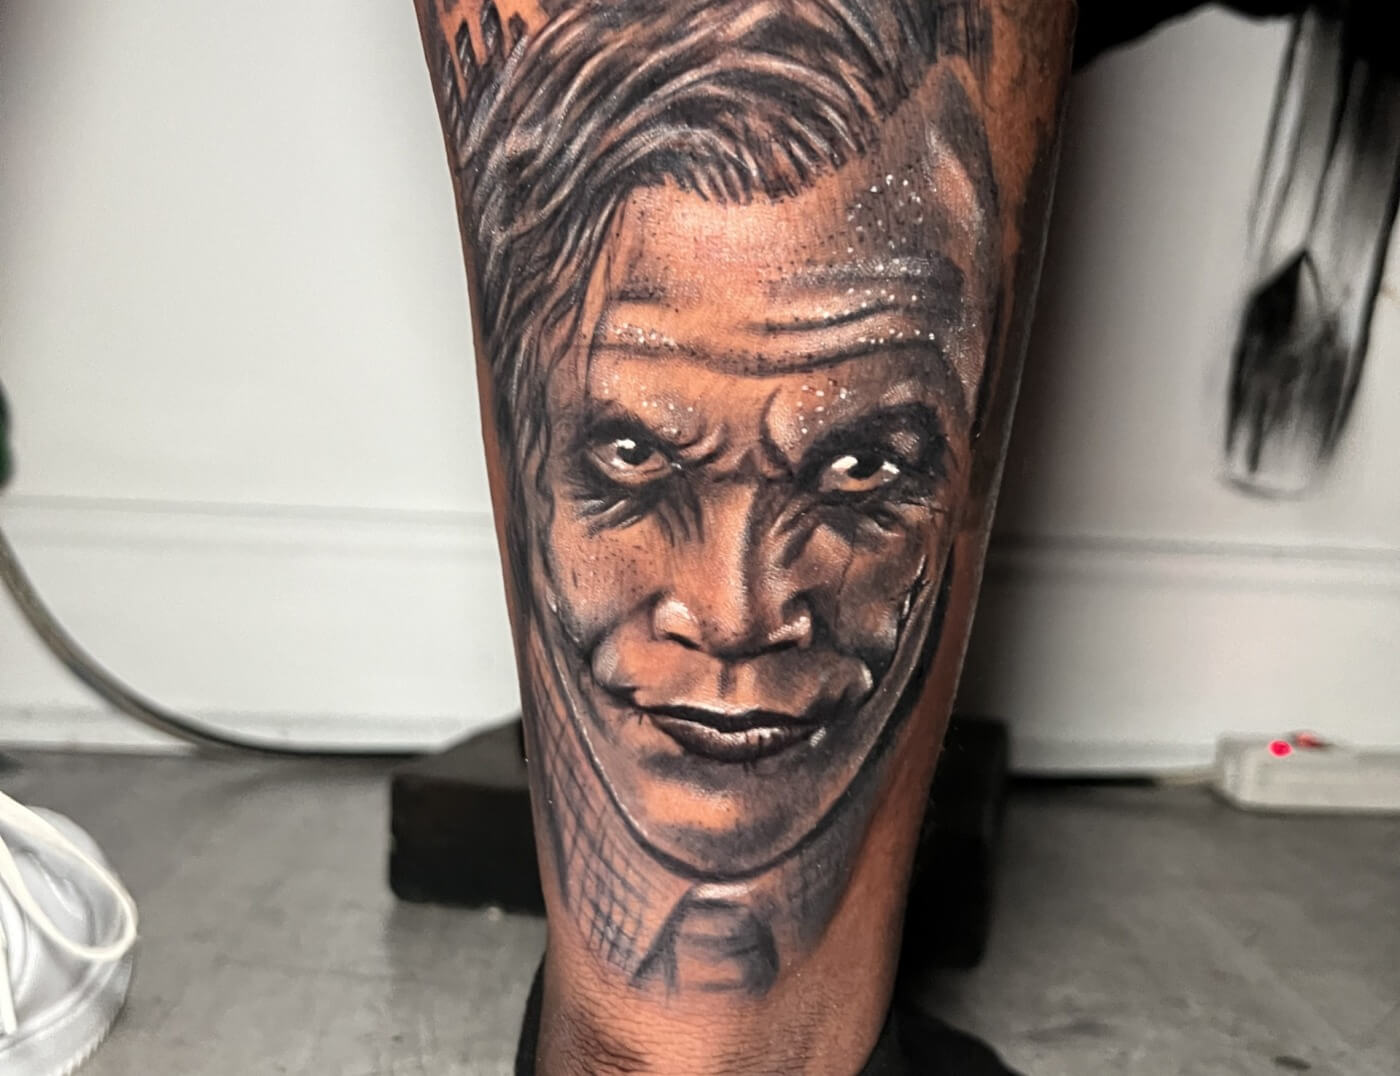 Portrait tattoo of Heath Ledger as The Joker by body artist DB. Wyte, a tattooer at Iron Palm Tattoos in the Castleberry Art district of Atlanta, GA. Call 404-973-7828 or stop by for a free consultation to book DB. Wyte.